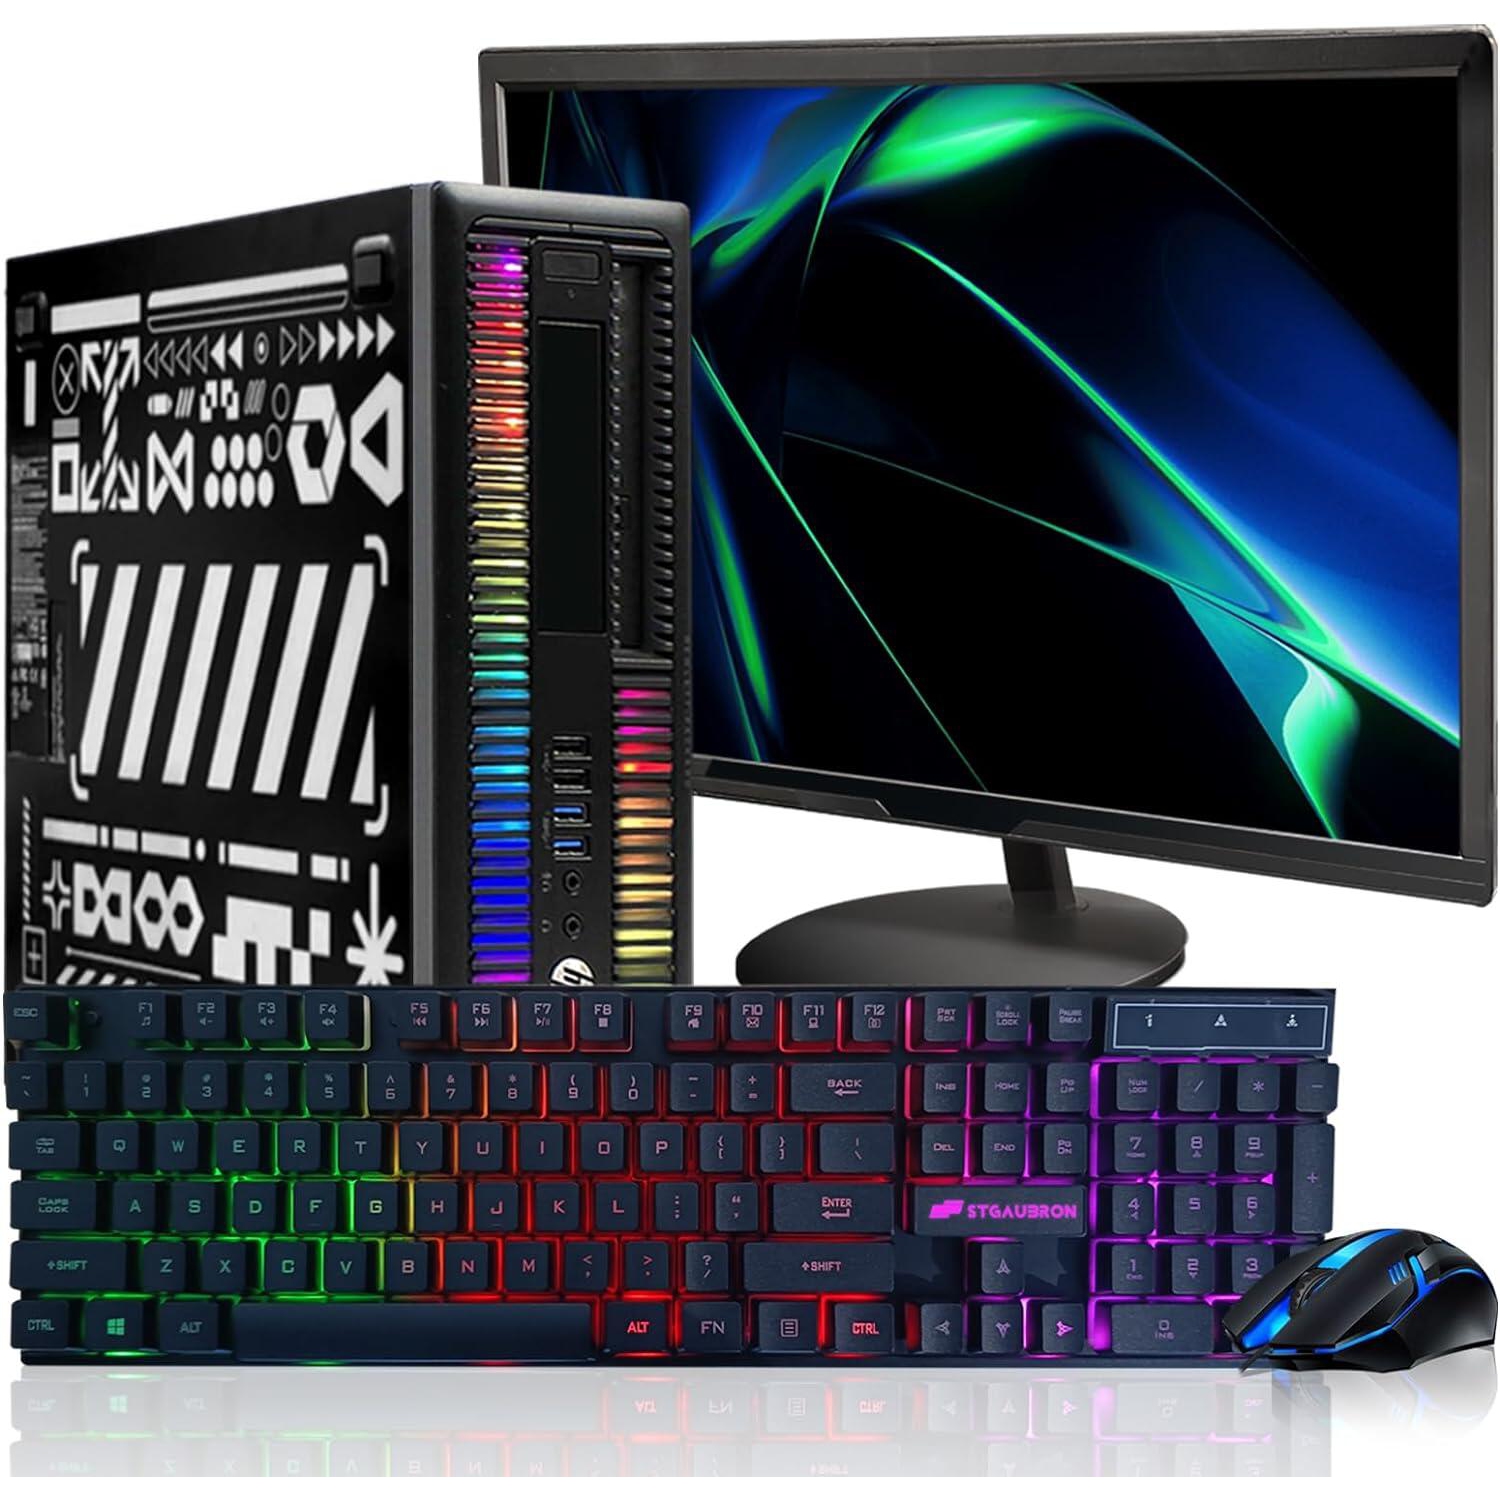 HP RGB Gaming Desktop Computer, Intel Core I7 3.4G up to 3.9GHz, GeForce GT 1030 2G, 16GB, 512G SSD, New 24" FHD LED, RGB KB&MS, 600M WiFi & BT 5.0, W10P64 -Refurbished Excellent